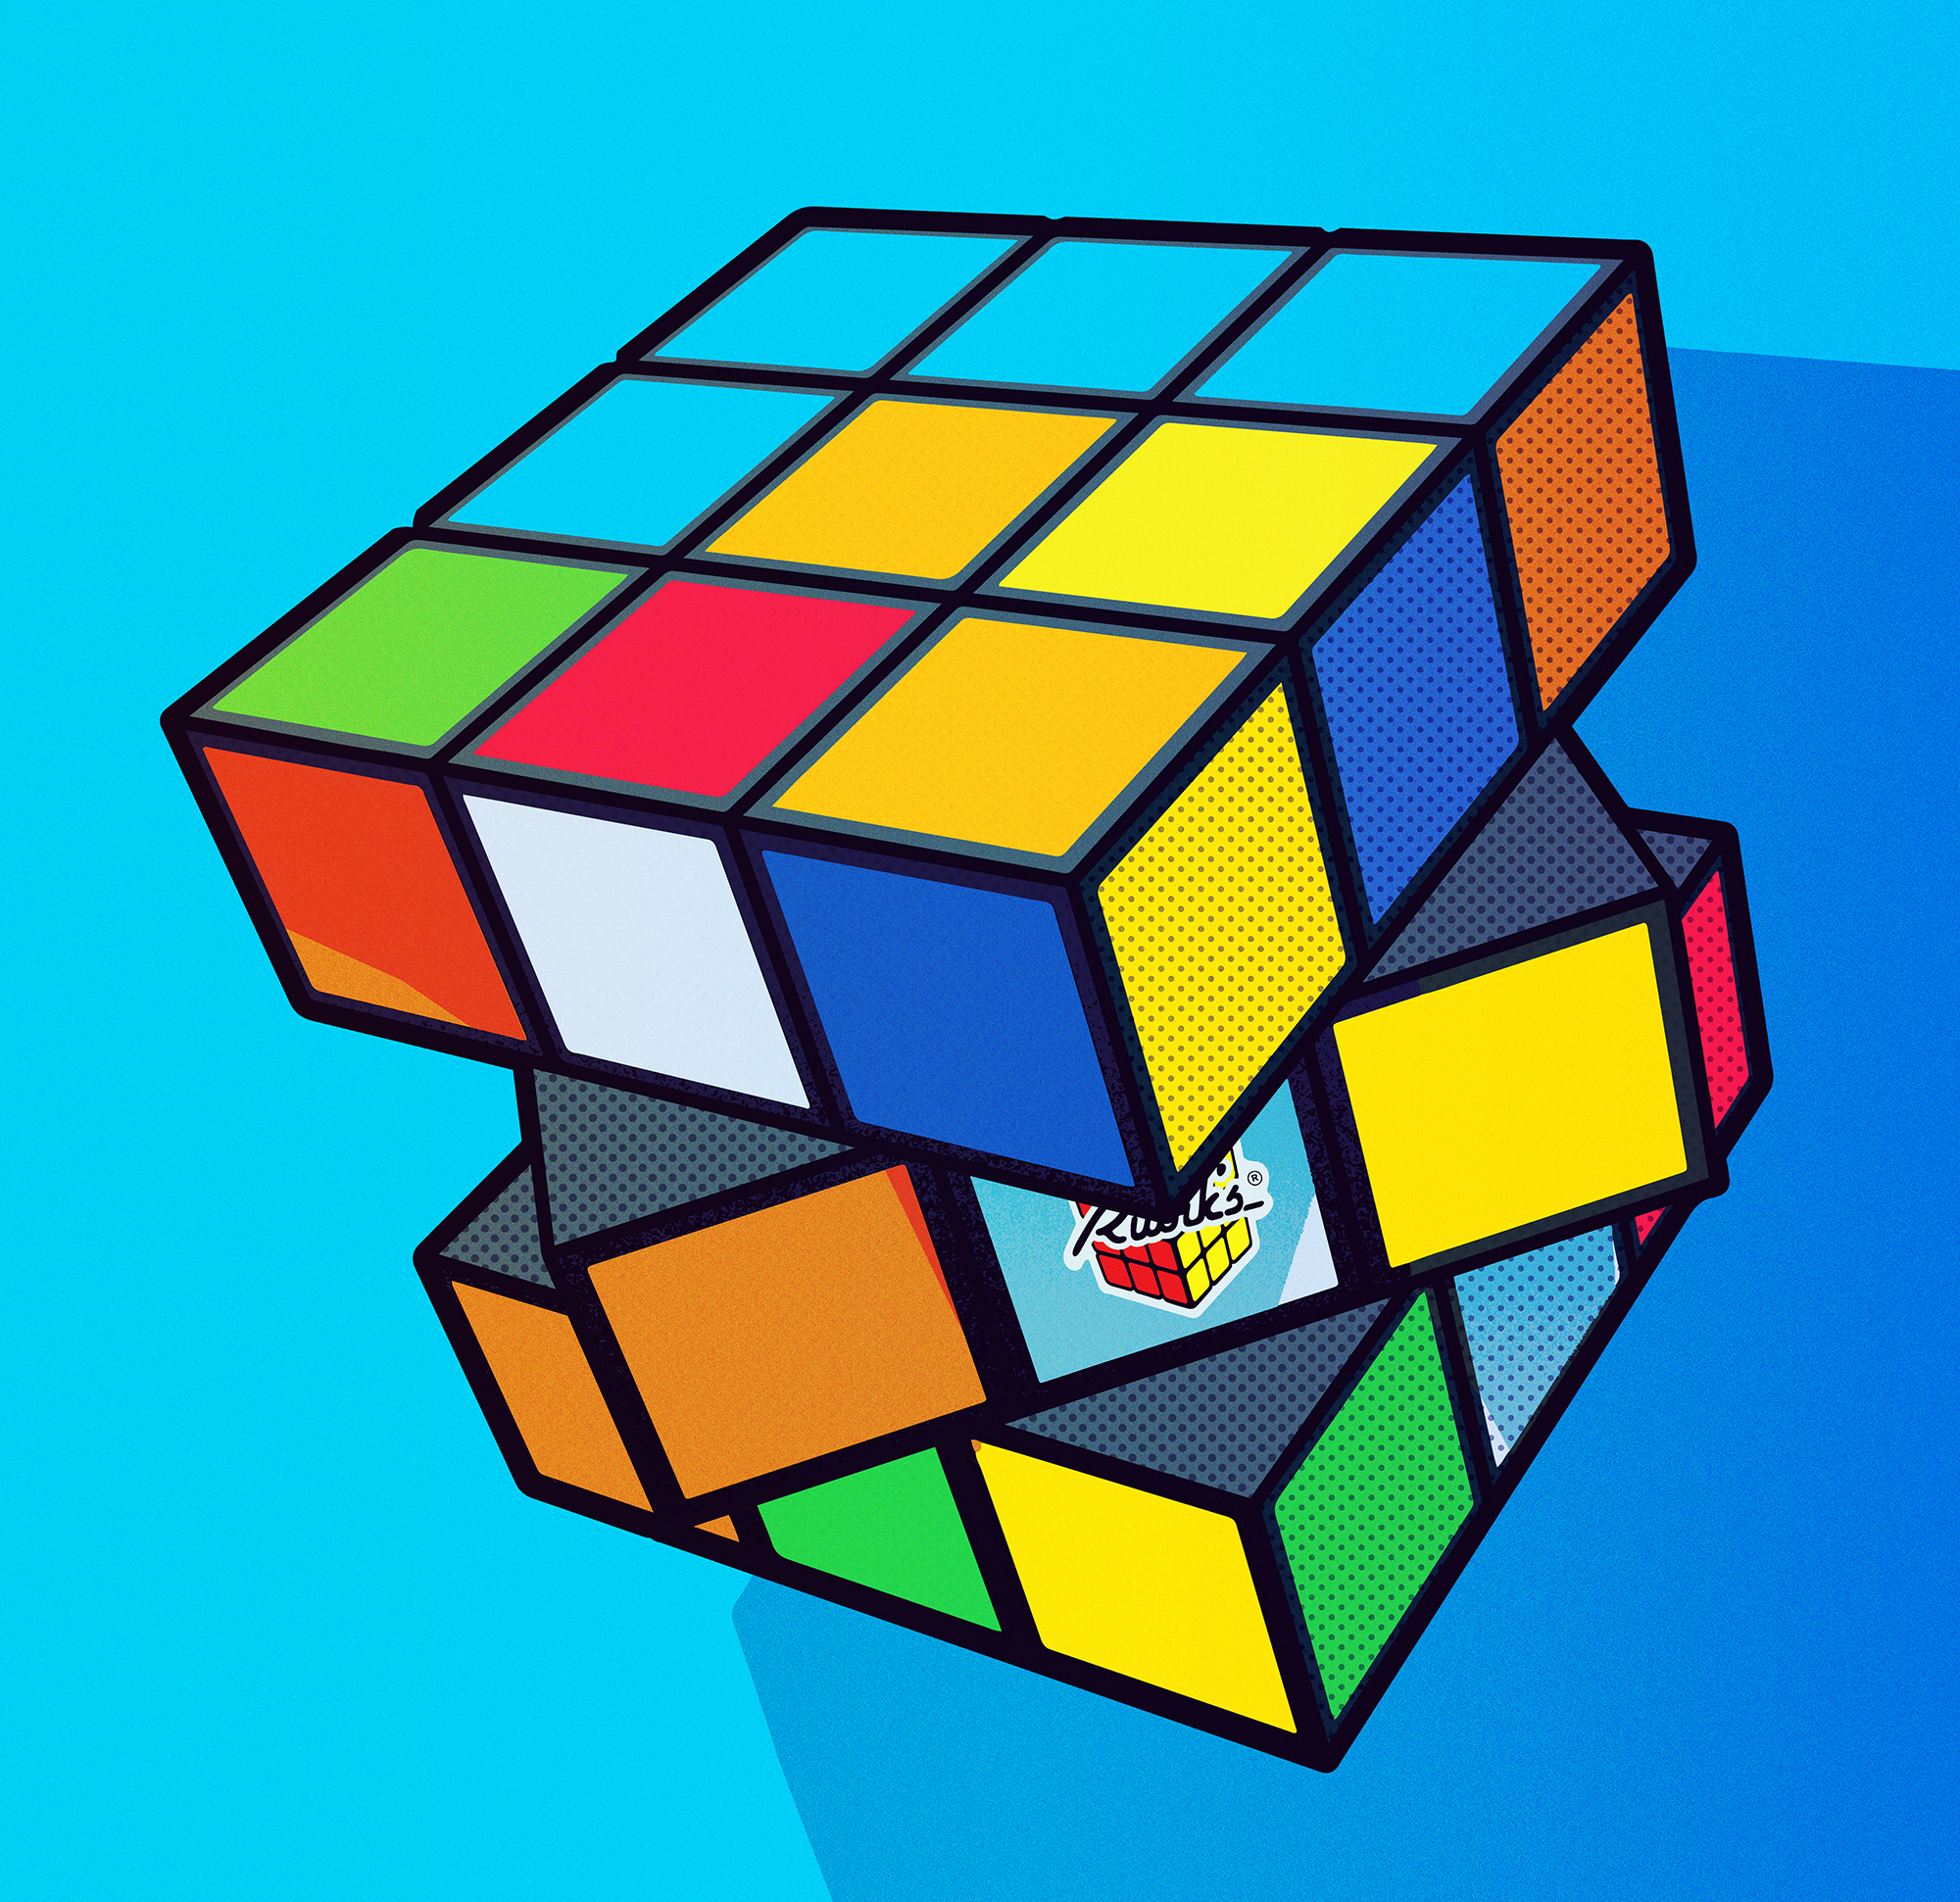 Rubik's Cube From The 90s By Bert Musketon